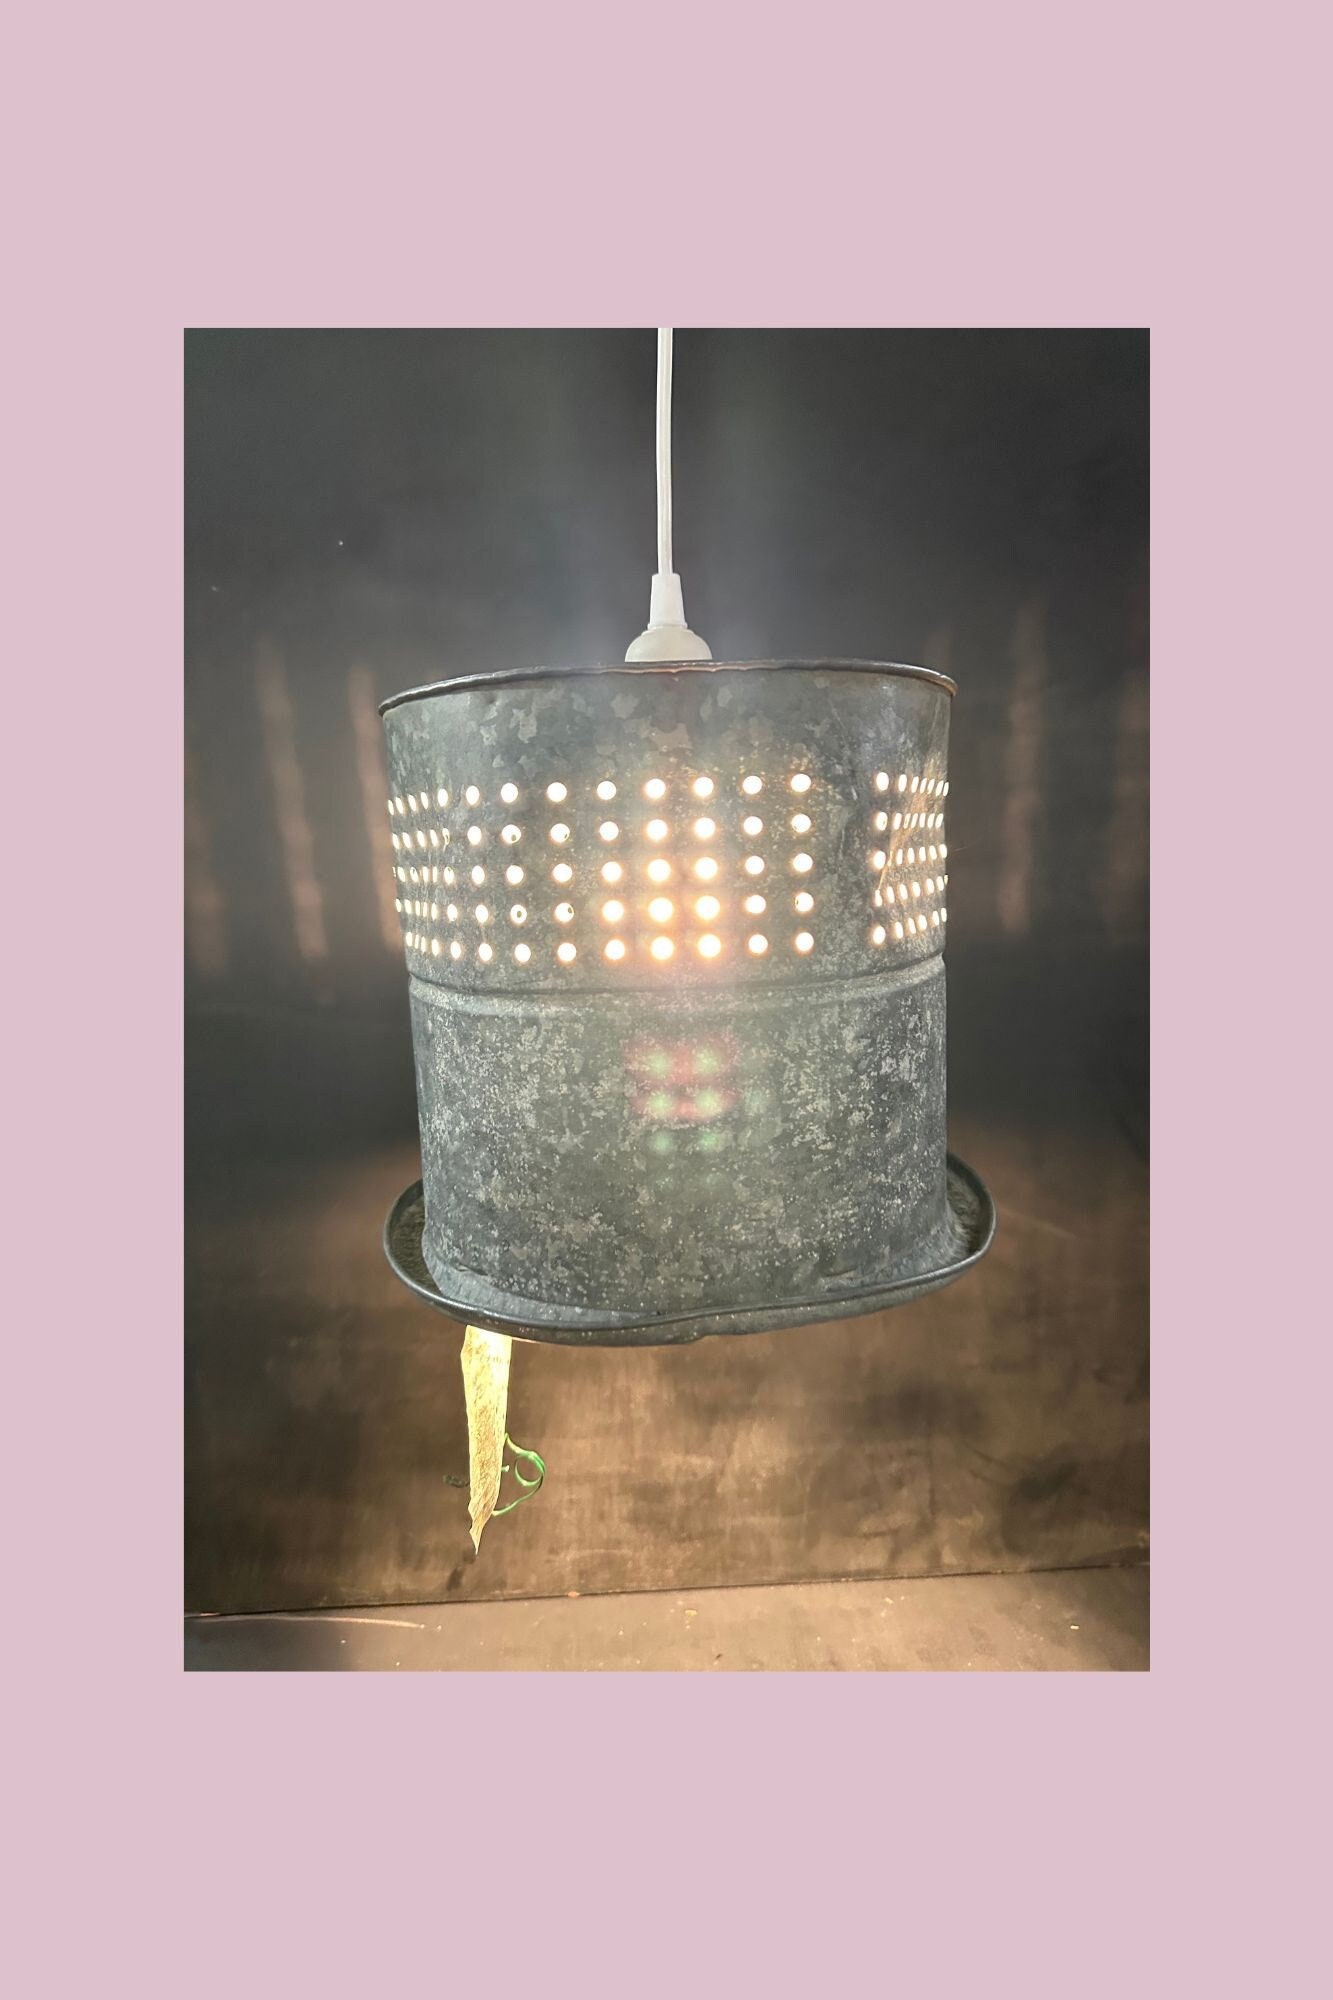 How to Make a Bucket Light for Camping - Burton Avenue